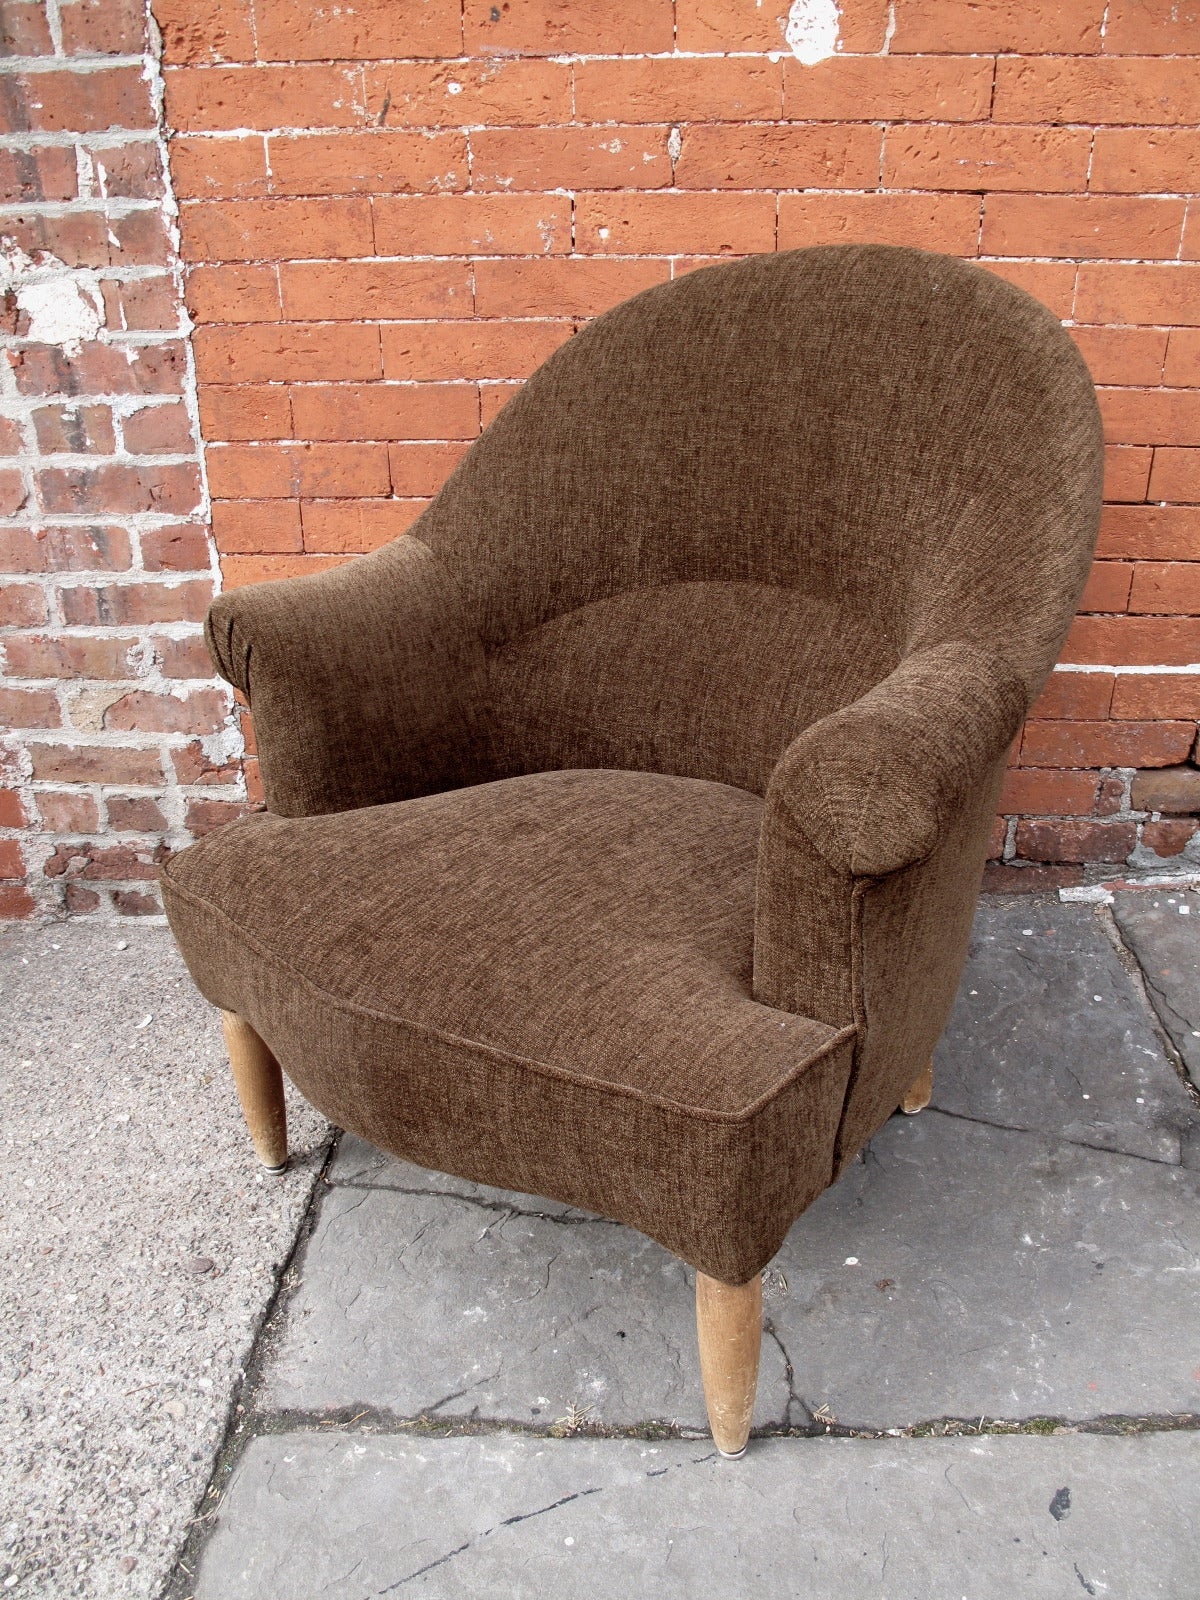 Reupholstered 1950s French chair with petite scroll arms.